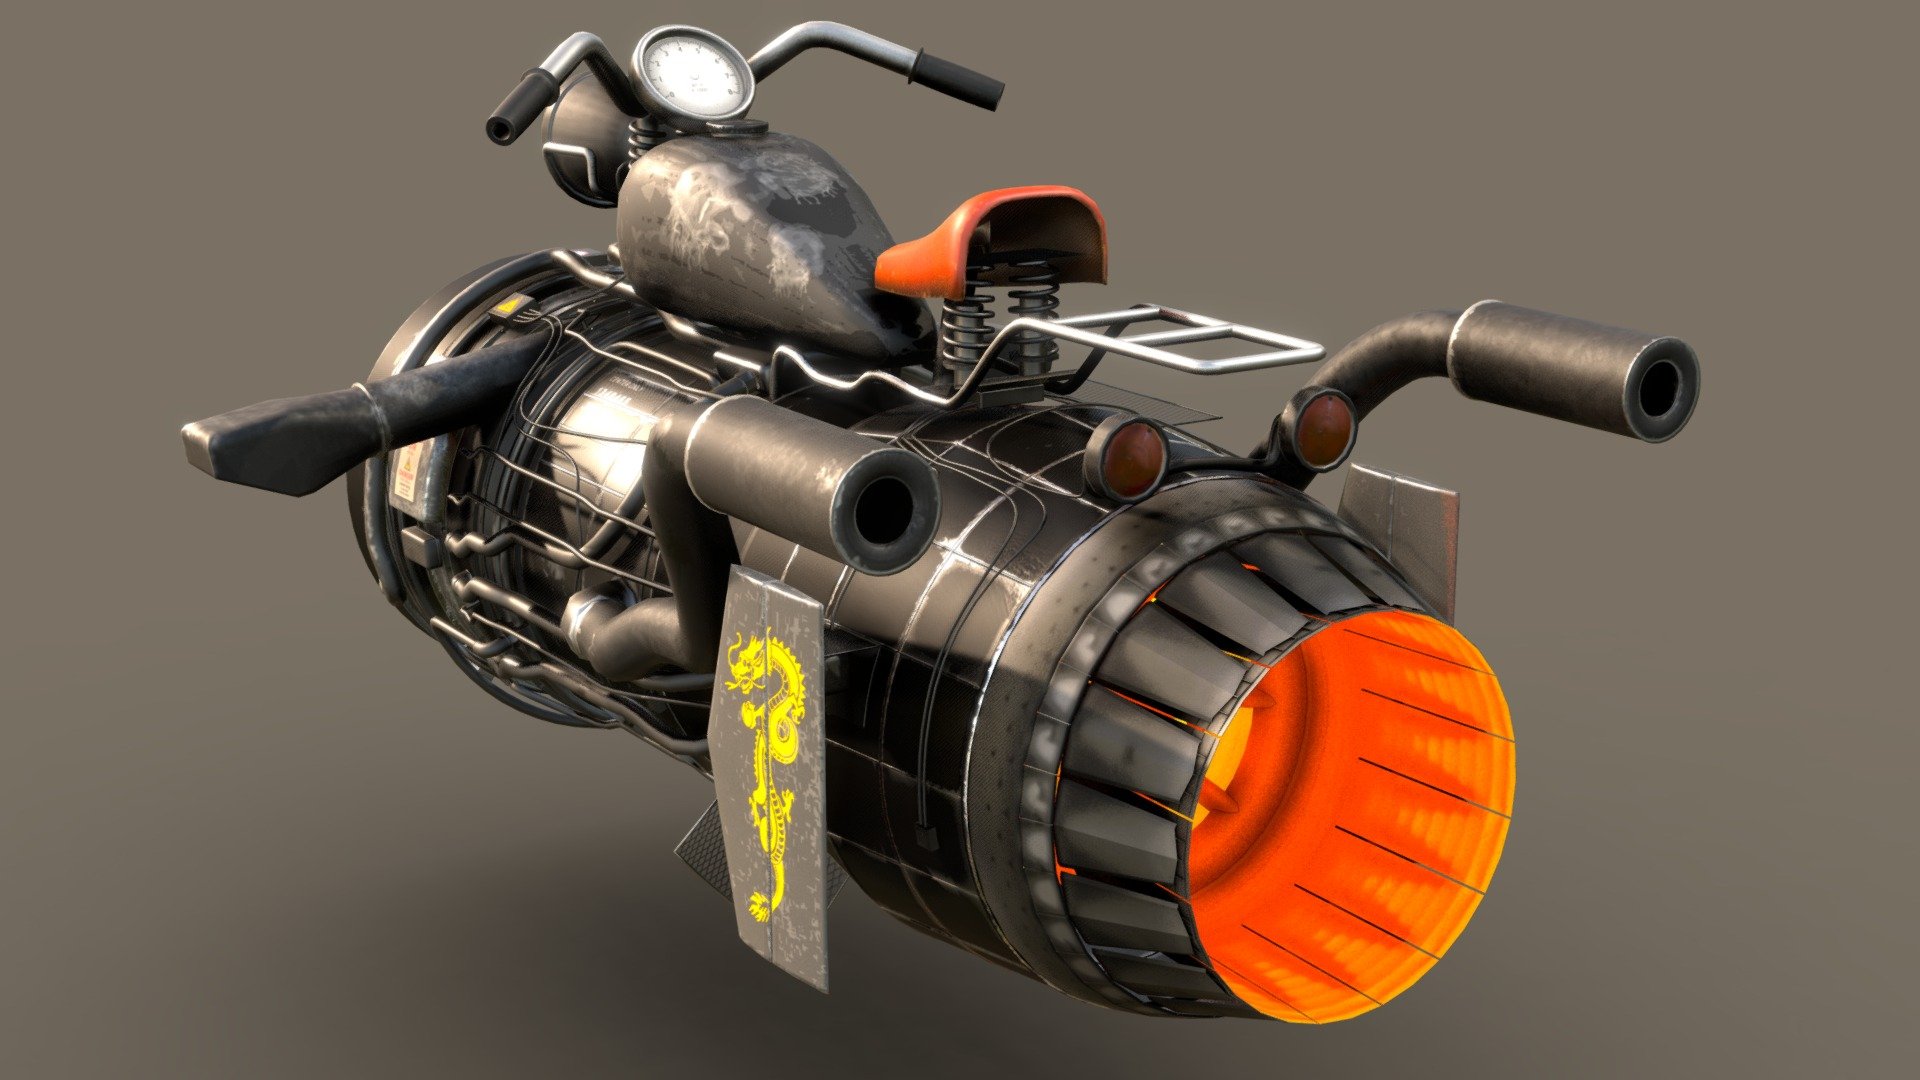 3d model of concept jetbike modeled and textured using Blender 2.79. Polygons: 45668 Vertices : 52734

Very important: Not for 3d printing - Jetbike -001 - Buy Royalty Free 3D model by mohamed.amir94812 3d model